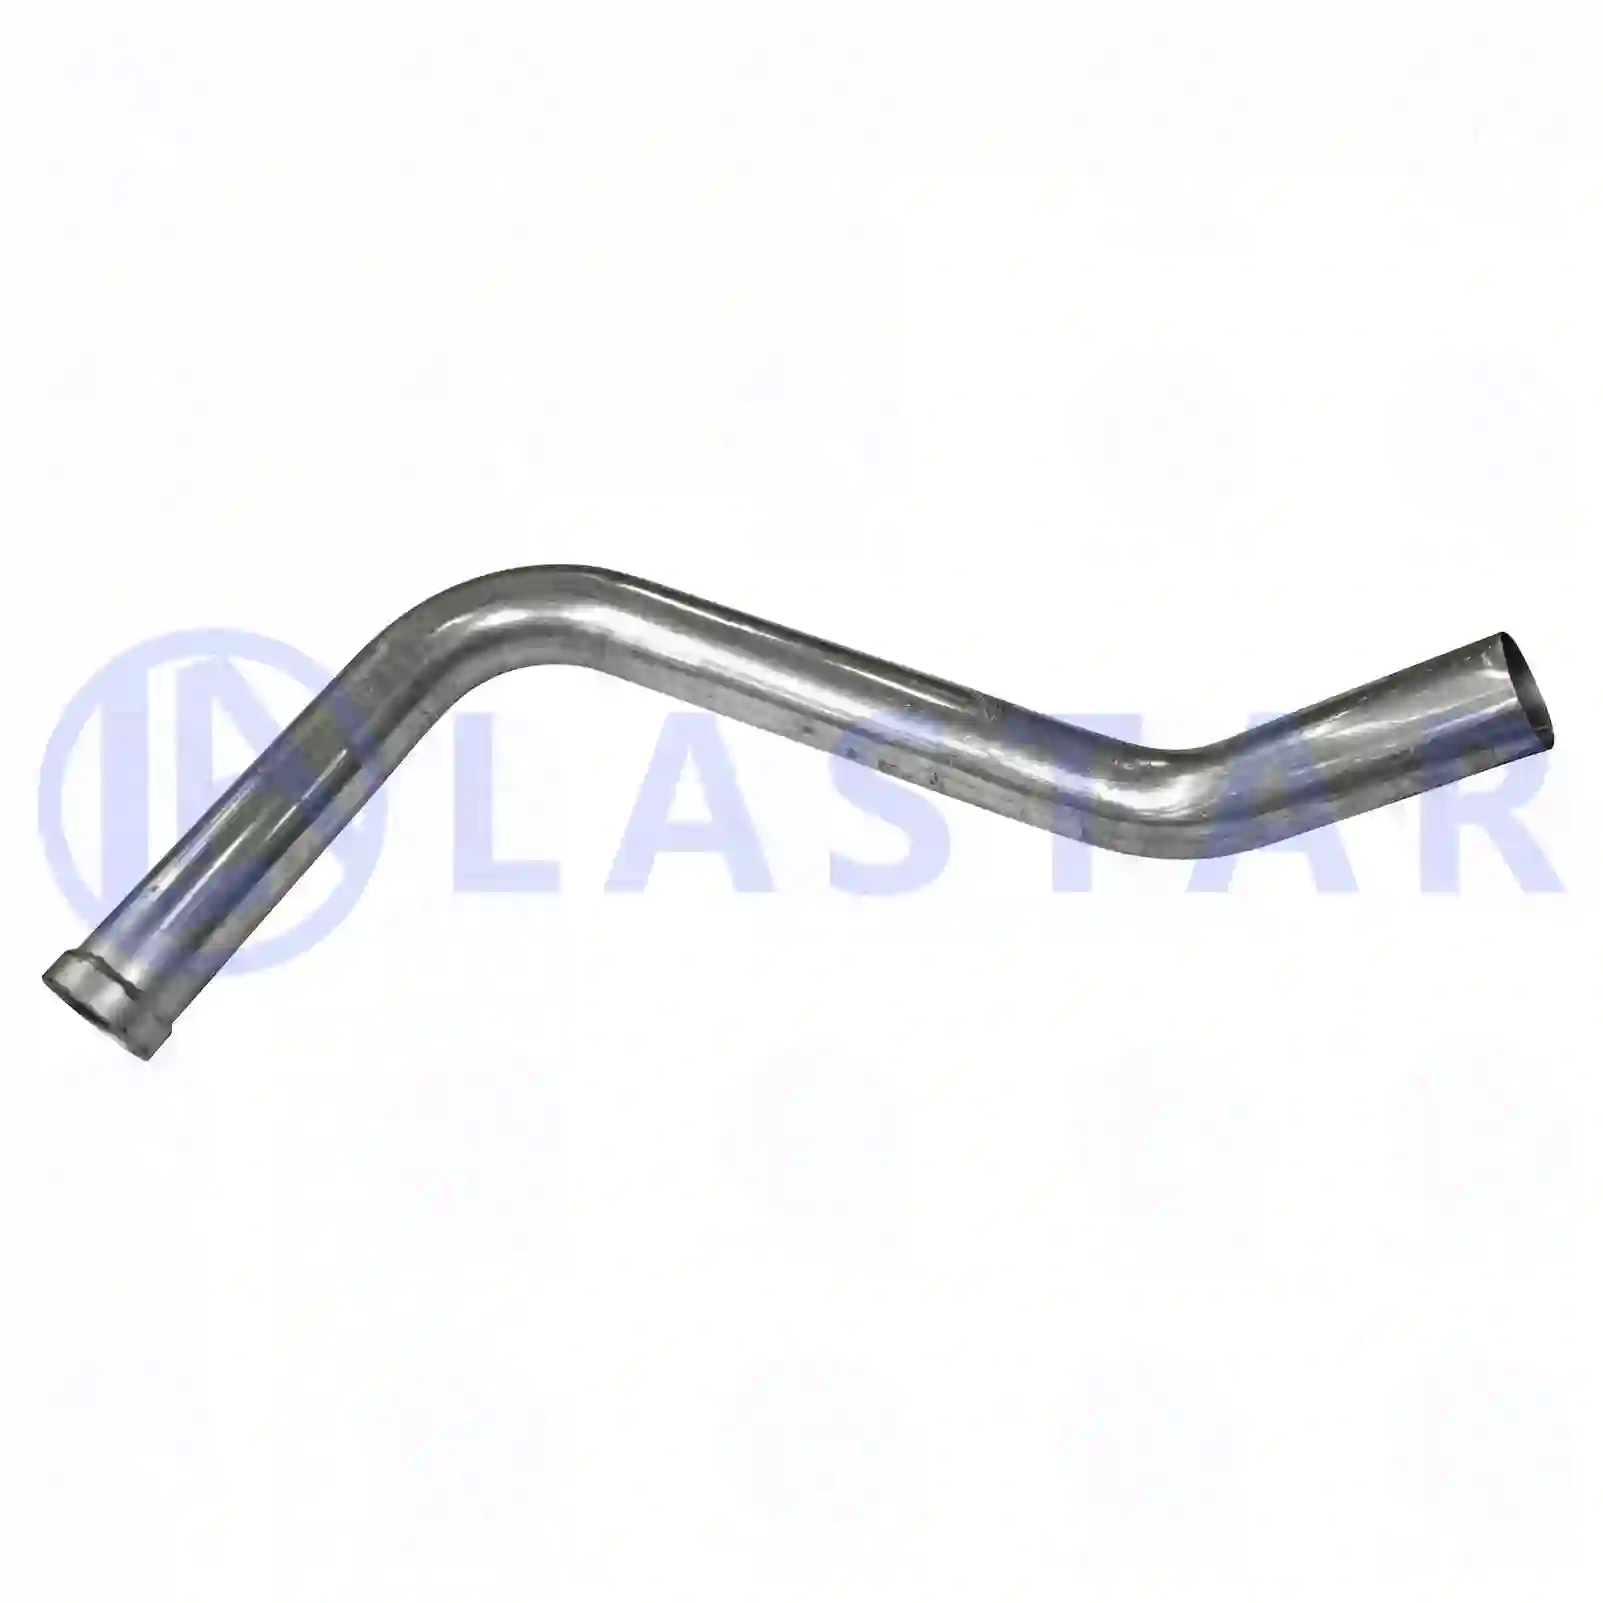 Exhaust pipe, 77706977, 1114170 ||  77706977 Lastar Spare Part | Truck Spare Parts, Auotomotive Spare Parts Exhaust pipe, 77706977, 1114170 ||  77706977 Lastar Spare Part | Truck Spare Parts, Auotomotive Spare Parts